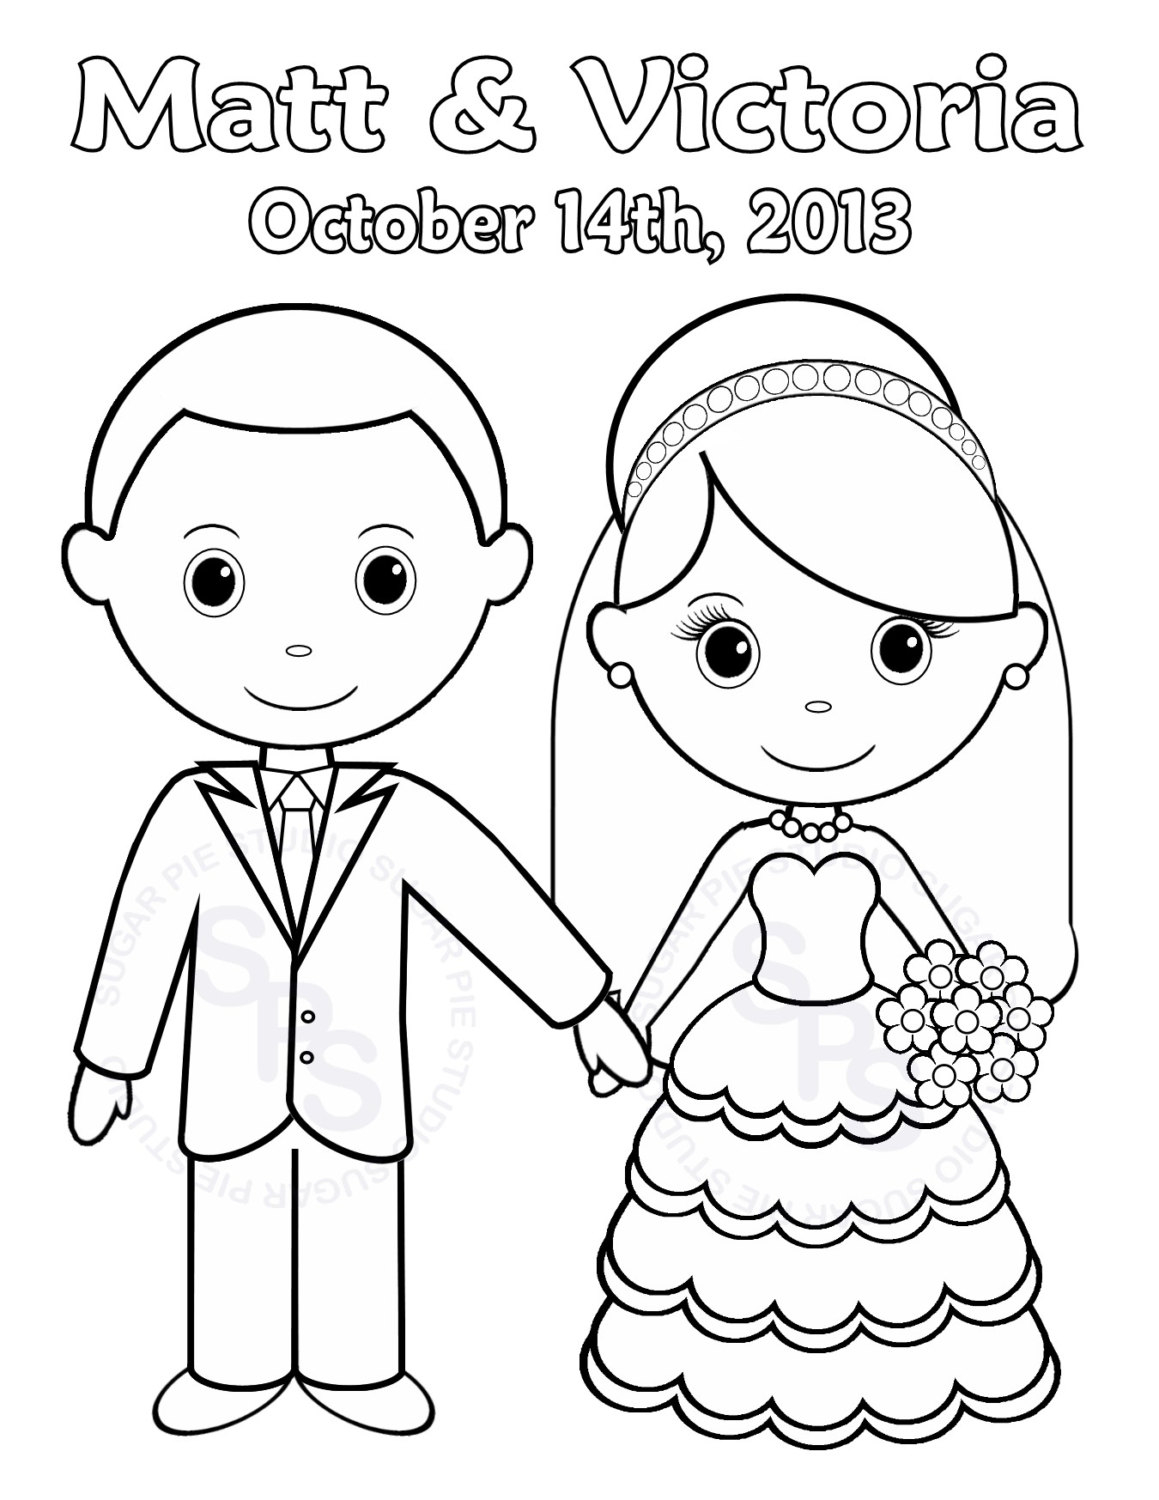 Customized Coloring Pages Custom Coloring Pages Free Monesmapyrene